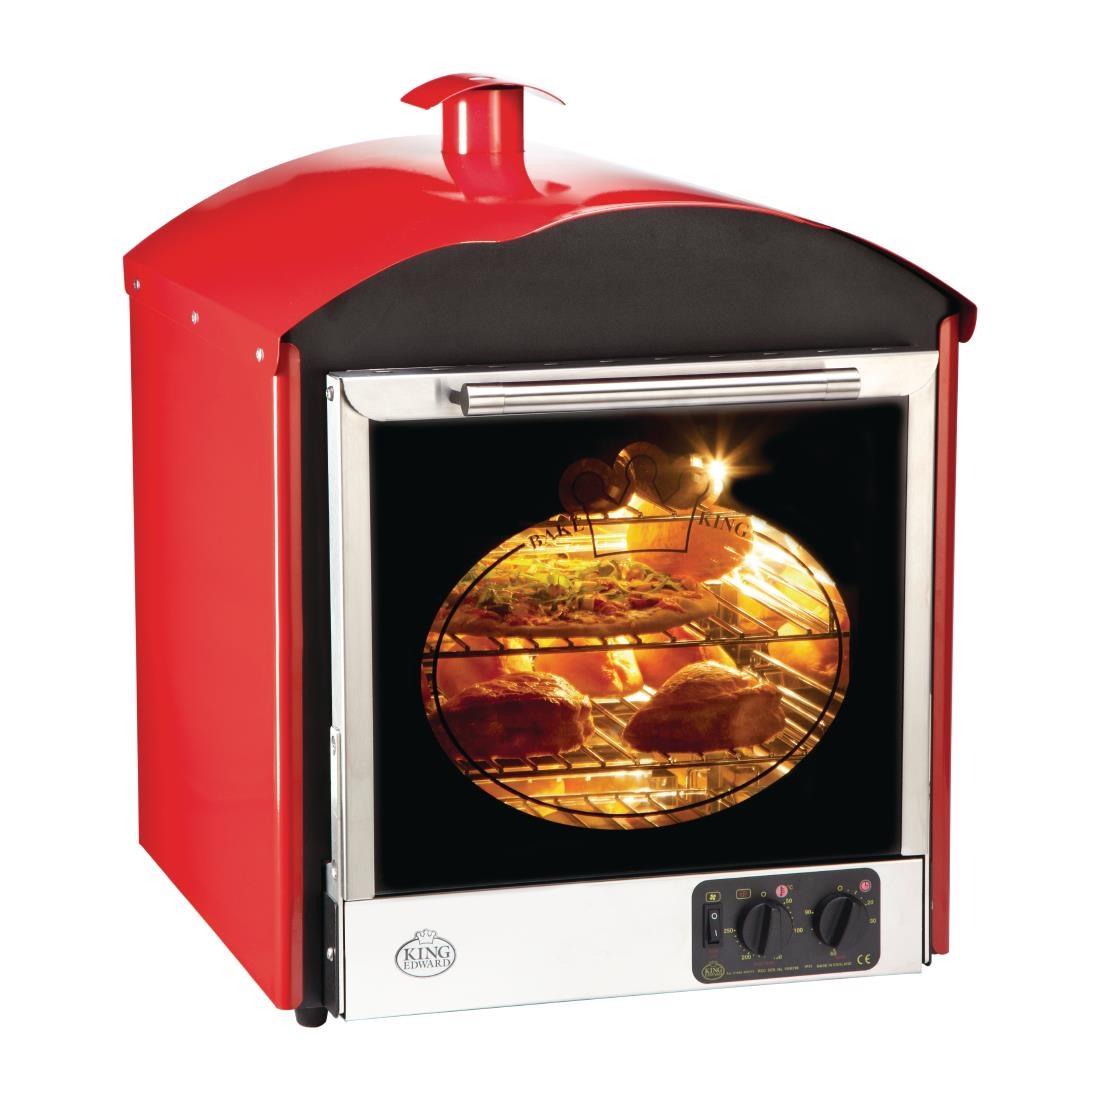 King Edward Bake King Solo Oven Red BKS-RED - HC121  - 1